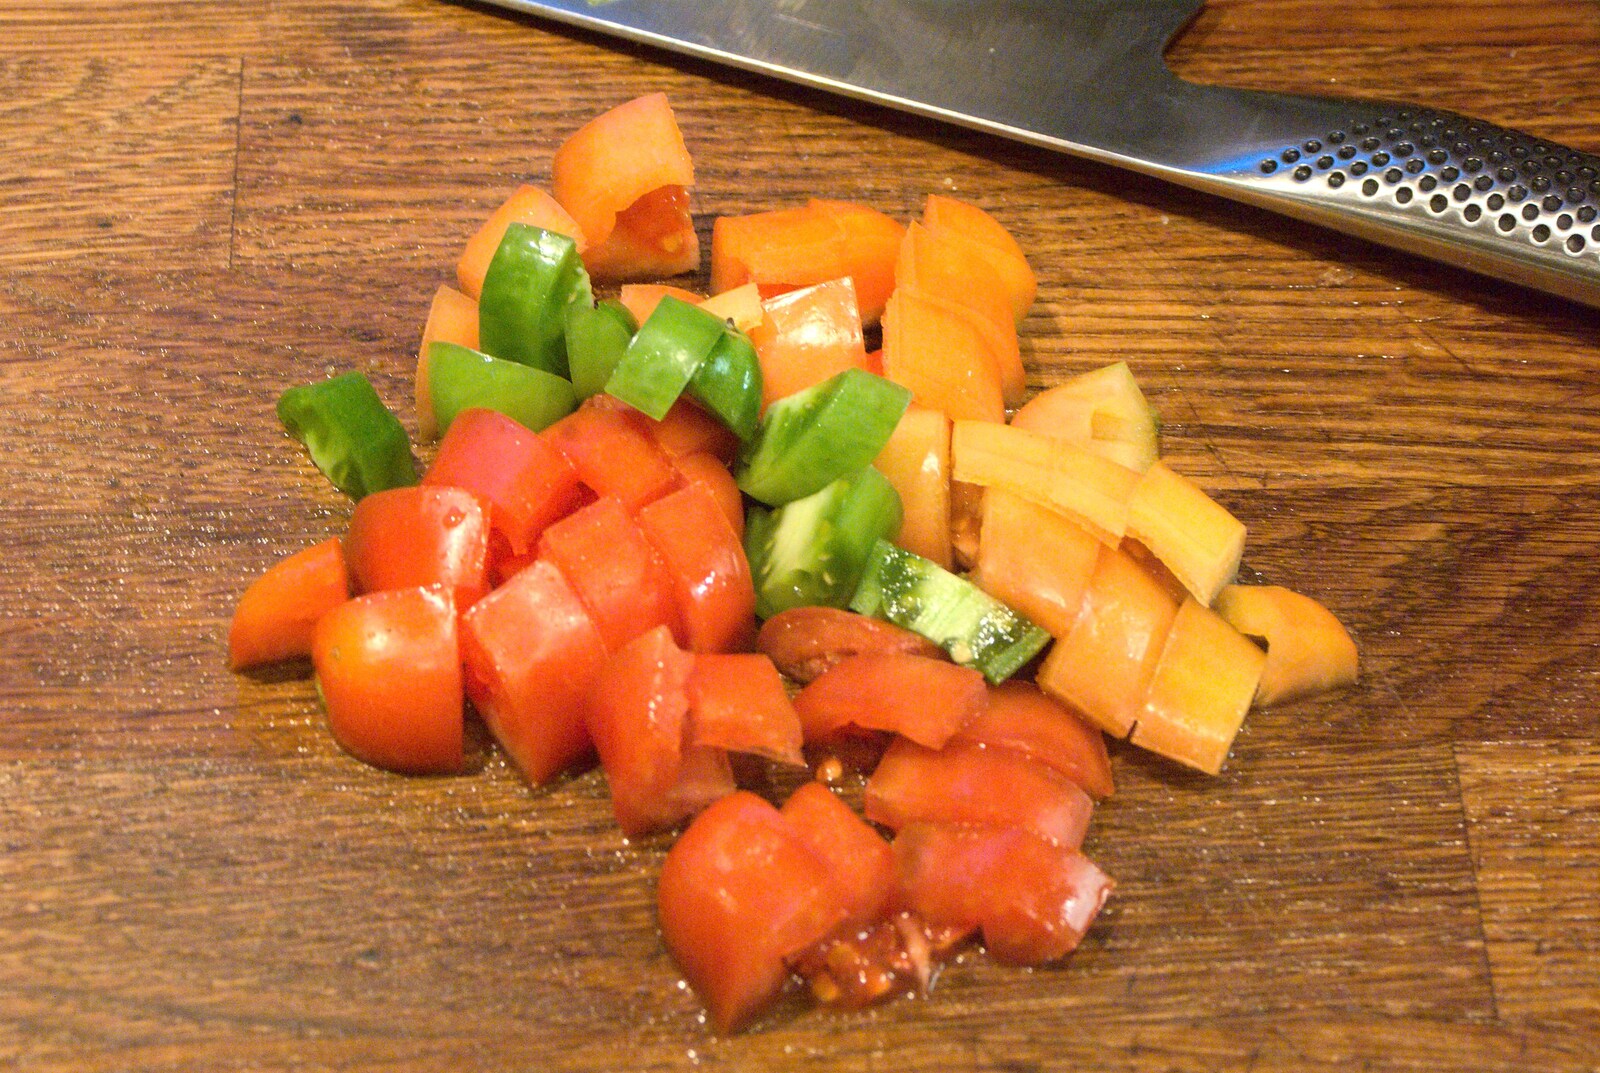 A random mixture of late-season chopped tomatoes from London Demonstration and a November Miscellany, London and Brome, Suffolk - 12th November 2011